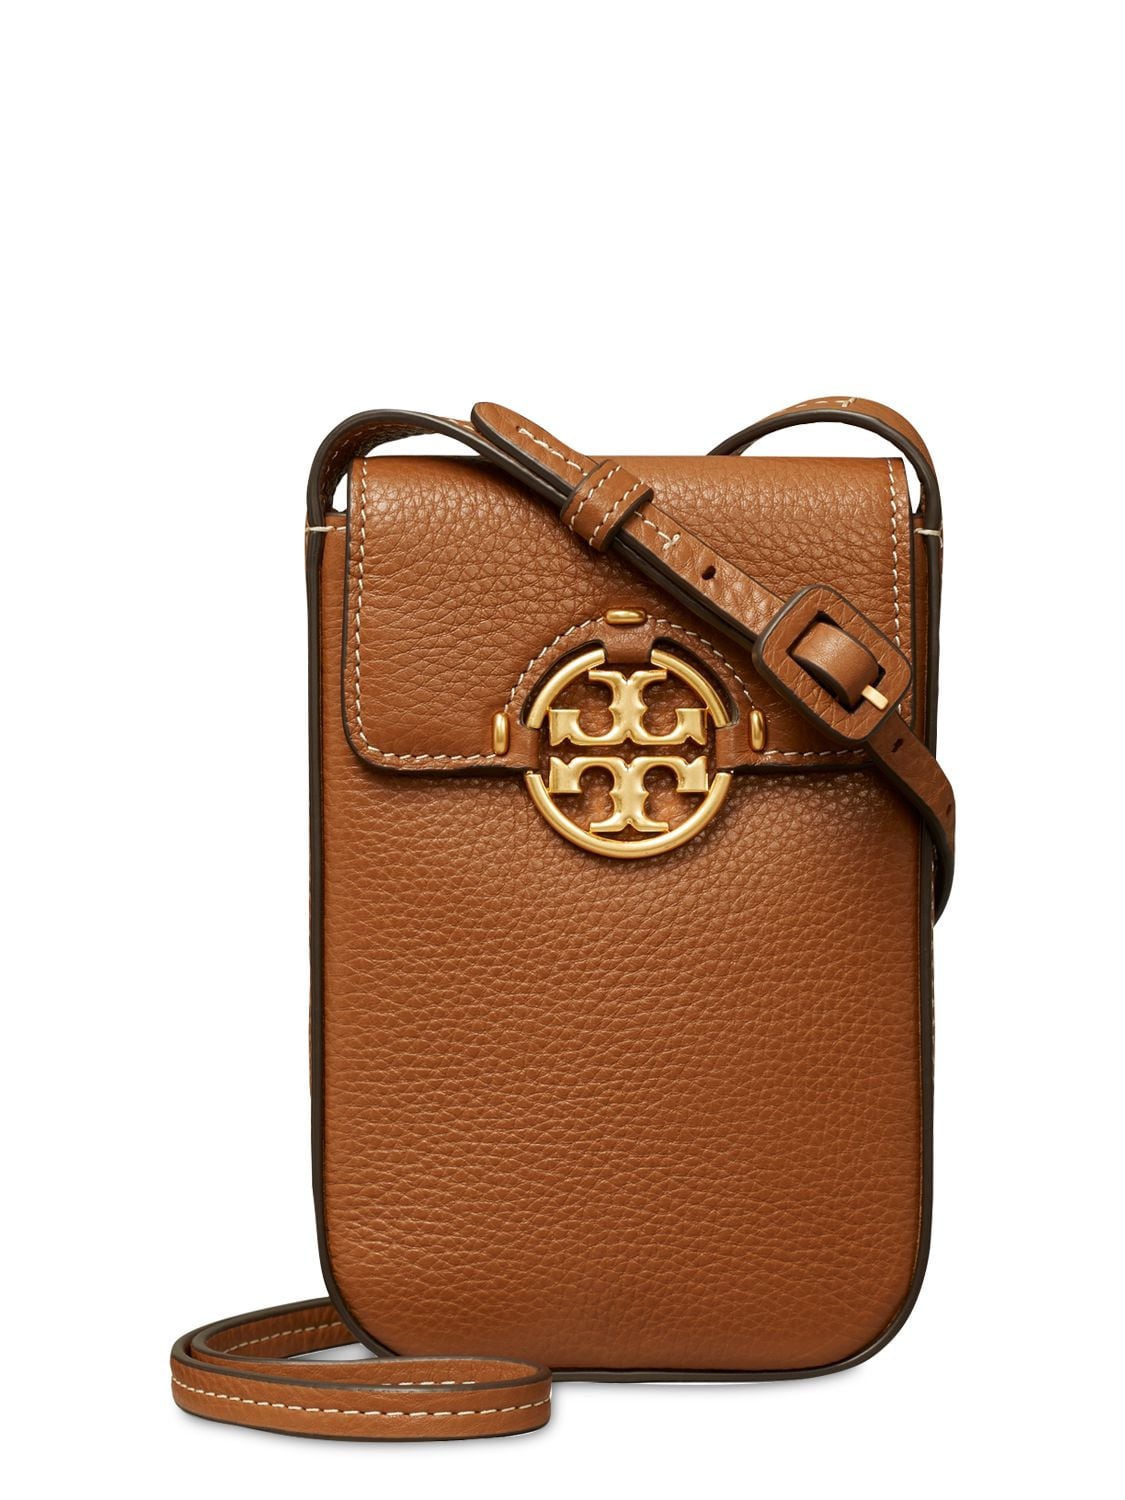 Tory Burch Miller Leather Phone Case W/ Strap In Light Umber